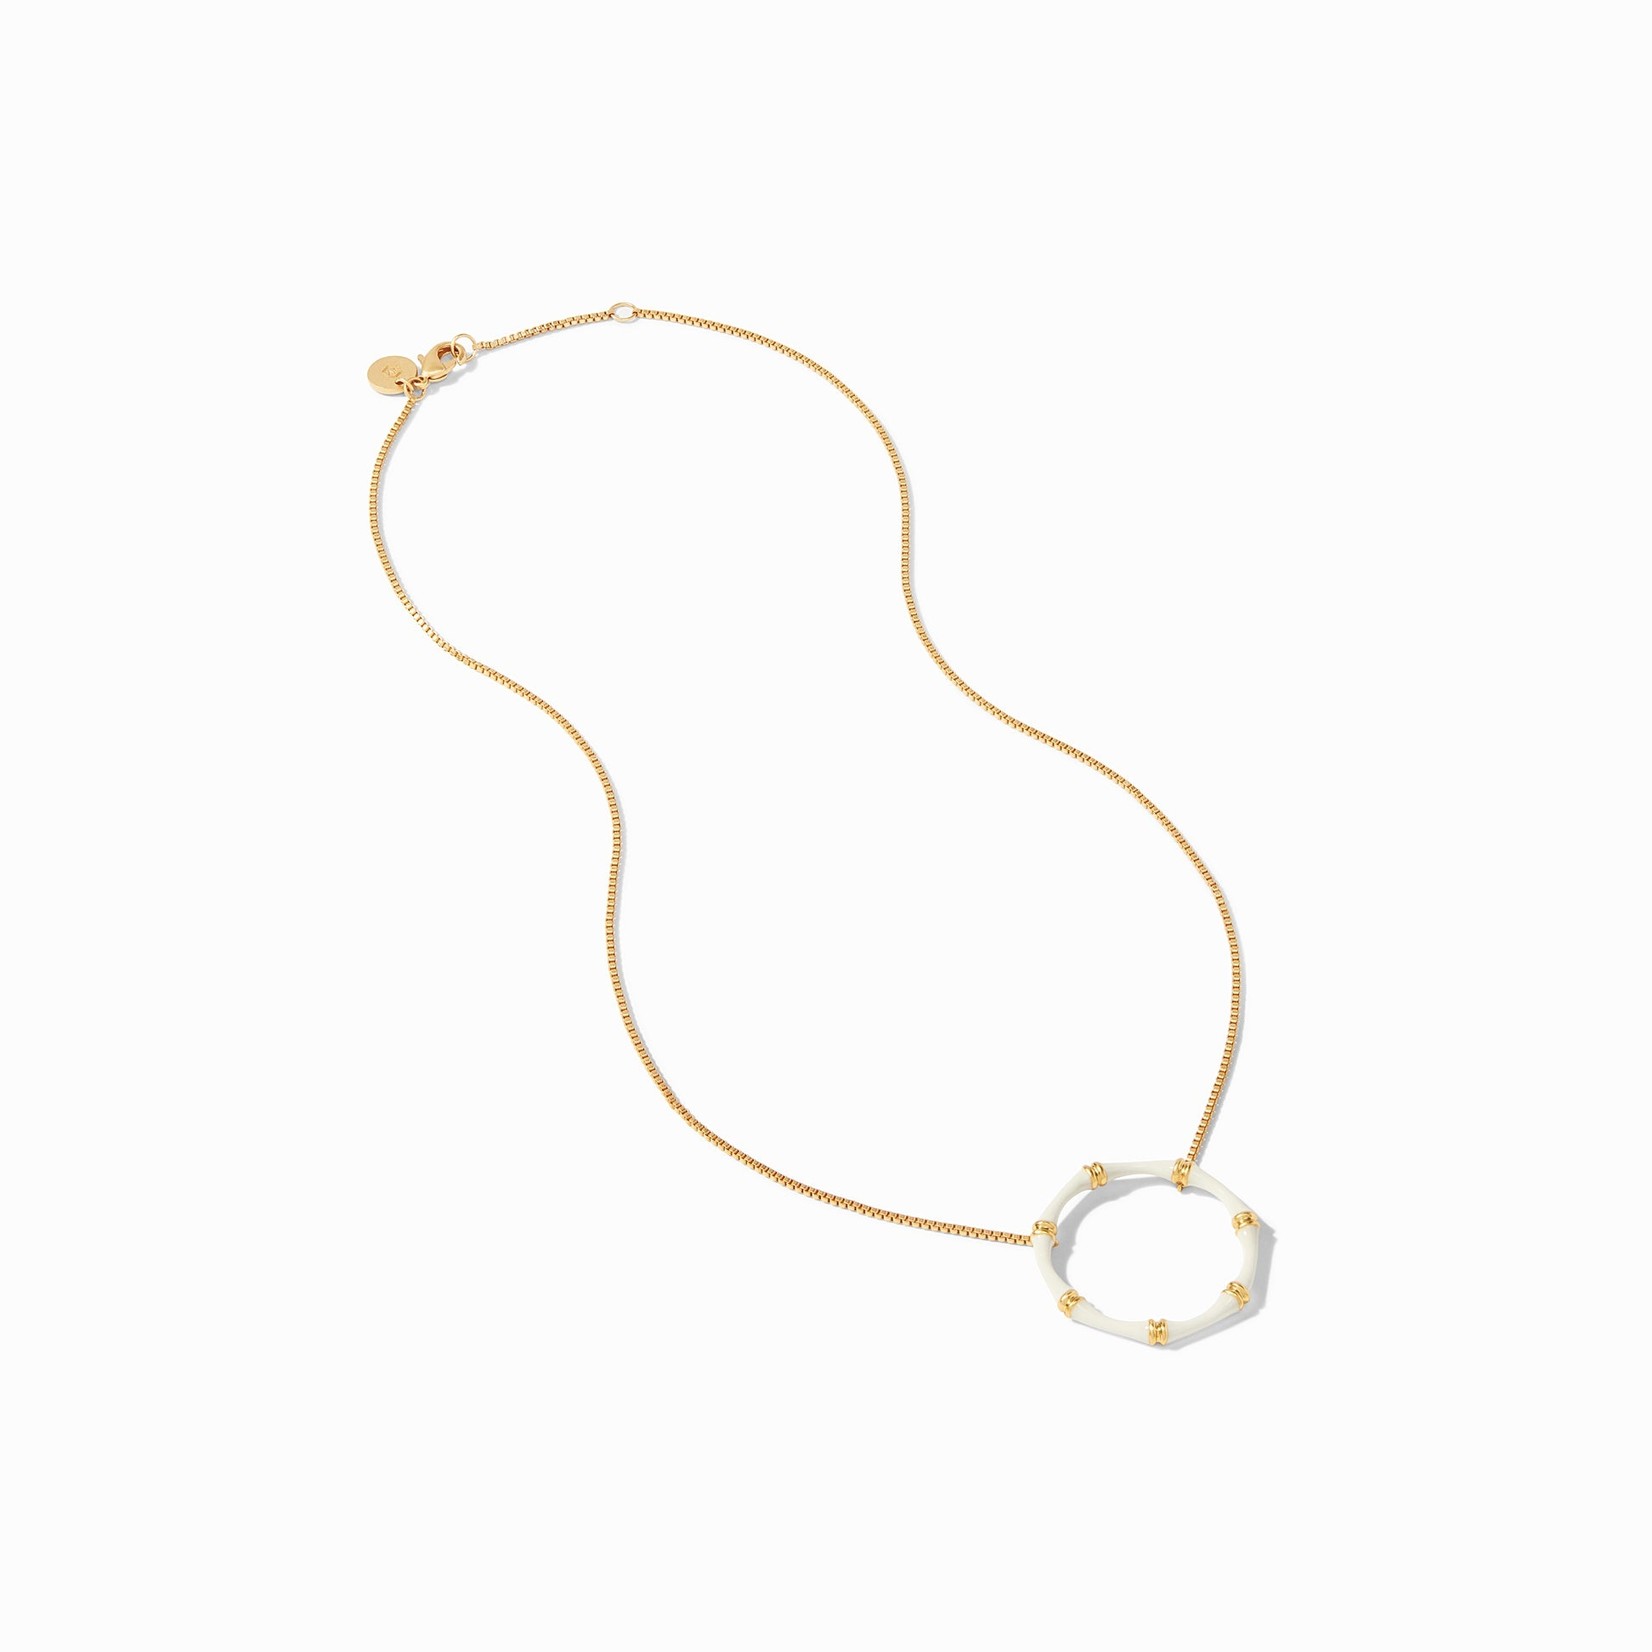 Julie Vos Bamboo Delicate Gold Necklace